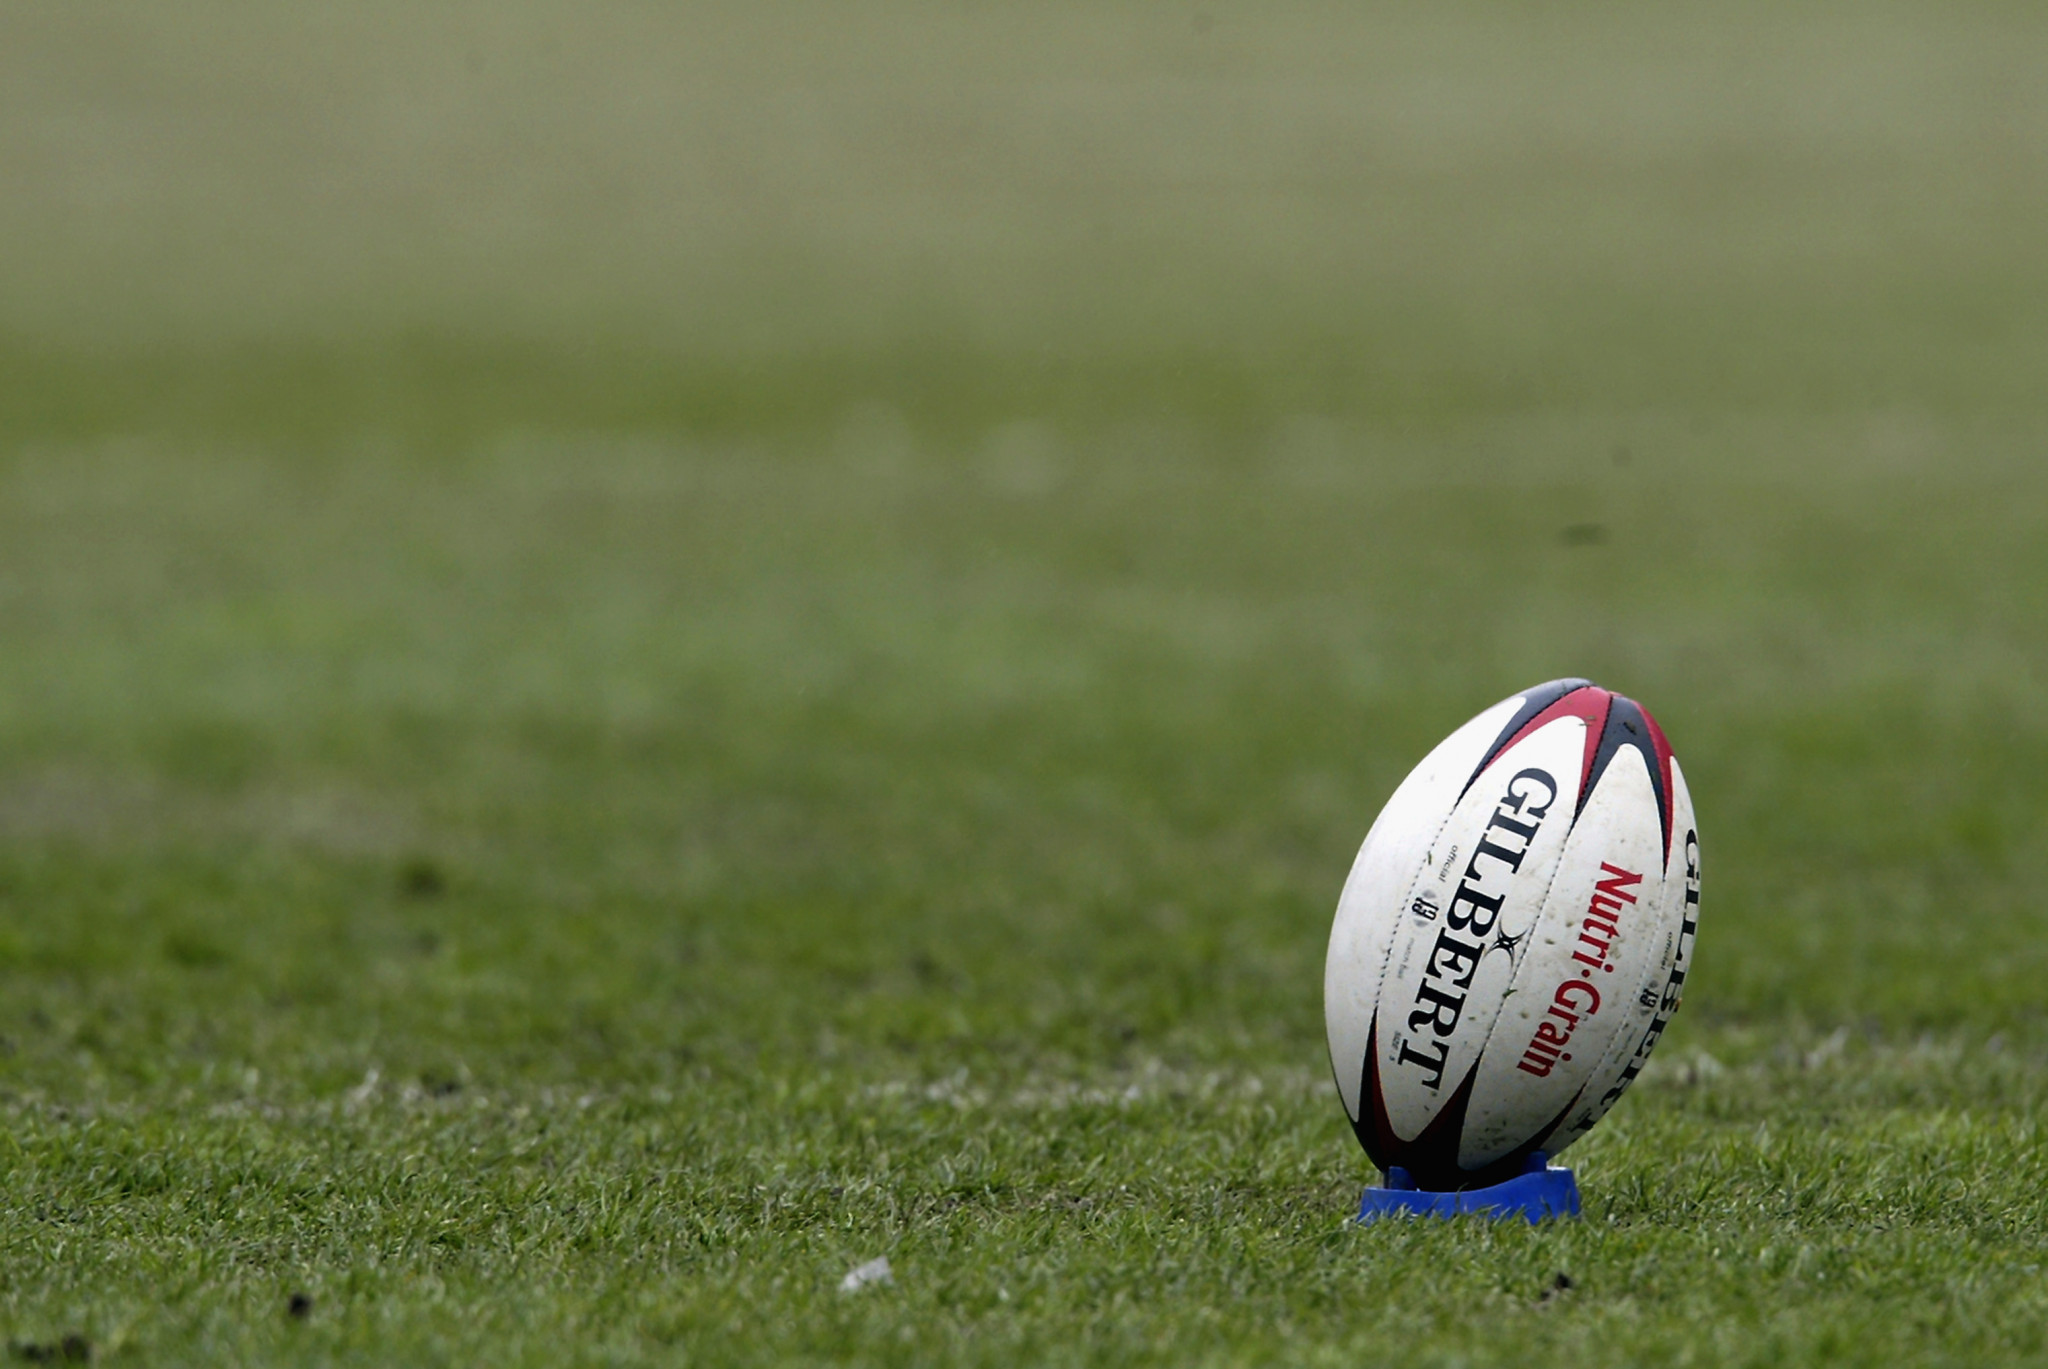 UK Anti-Doping hands four-year suspensions to two rugby players